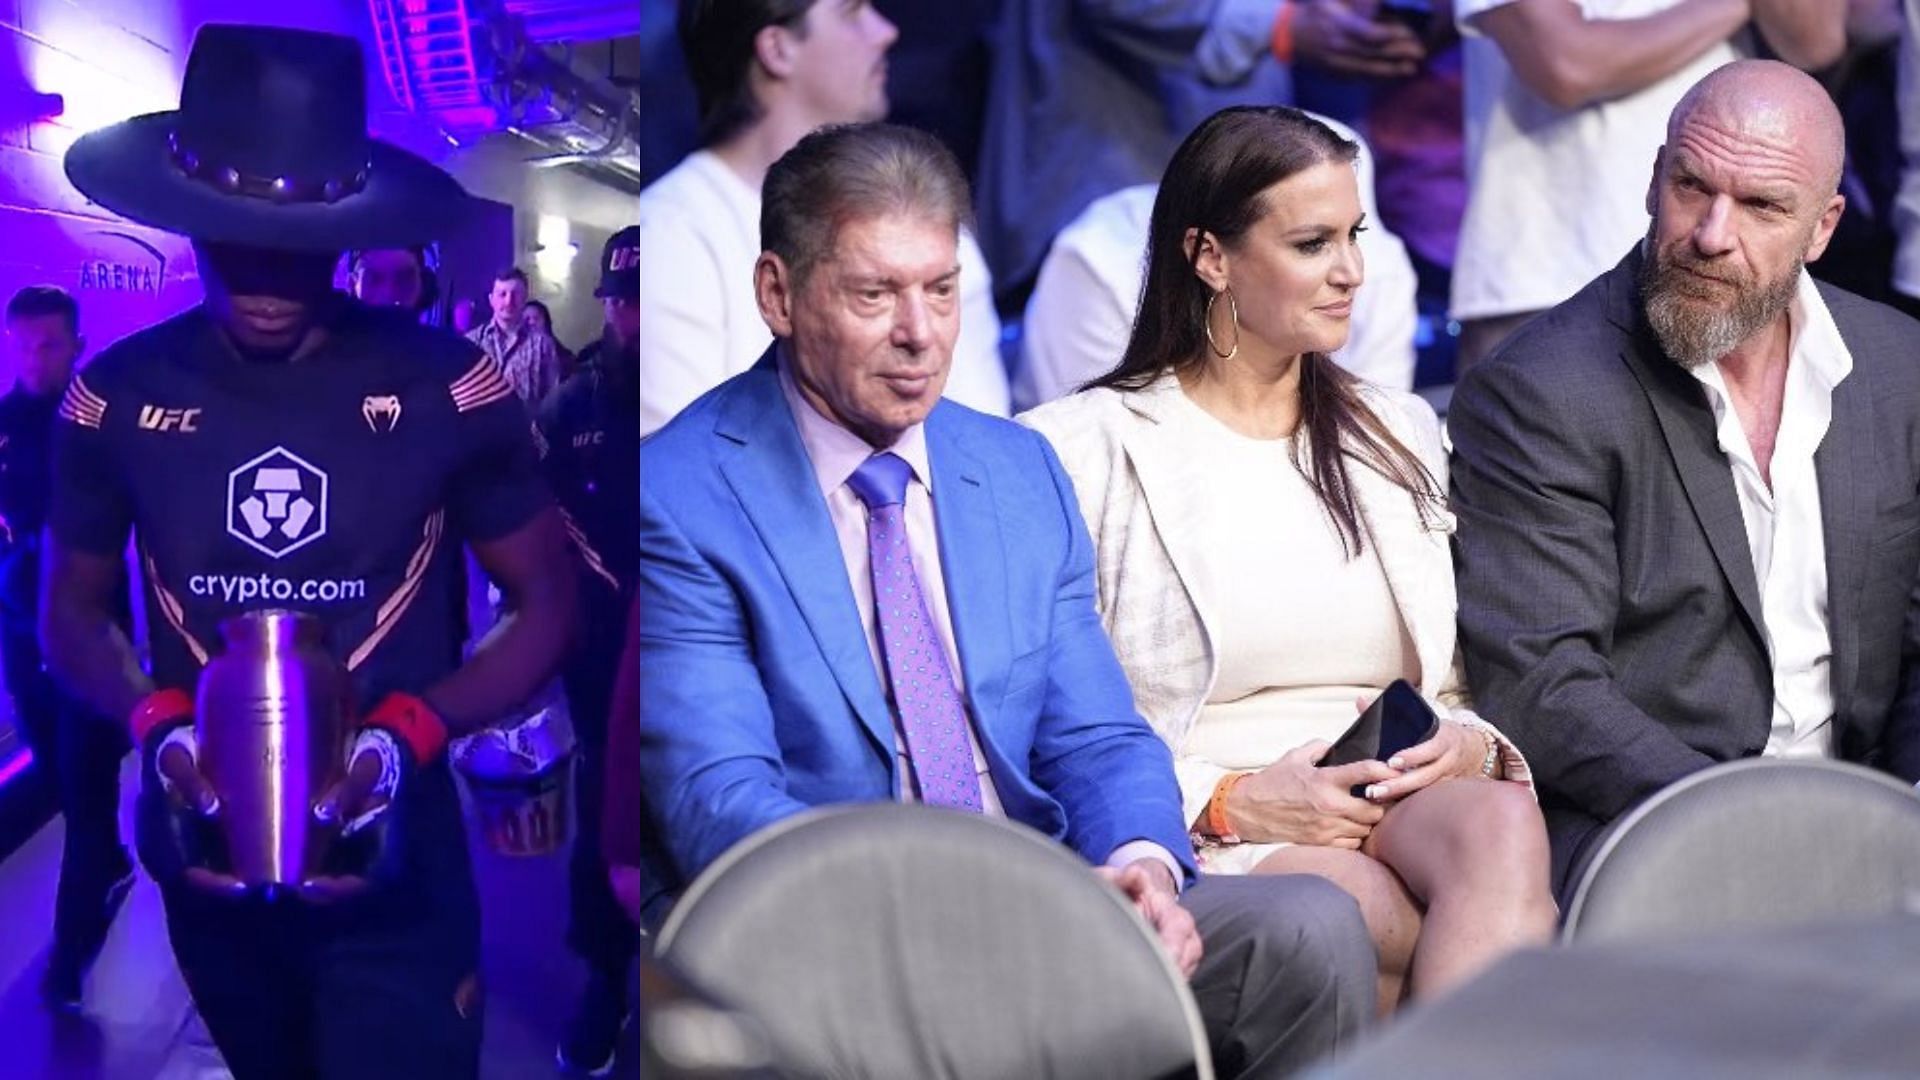 Israel Adesanya paid tribute to The Undertaker with Vince &amp; Stephanie McMahon and Triple H in attendance!